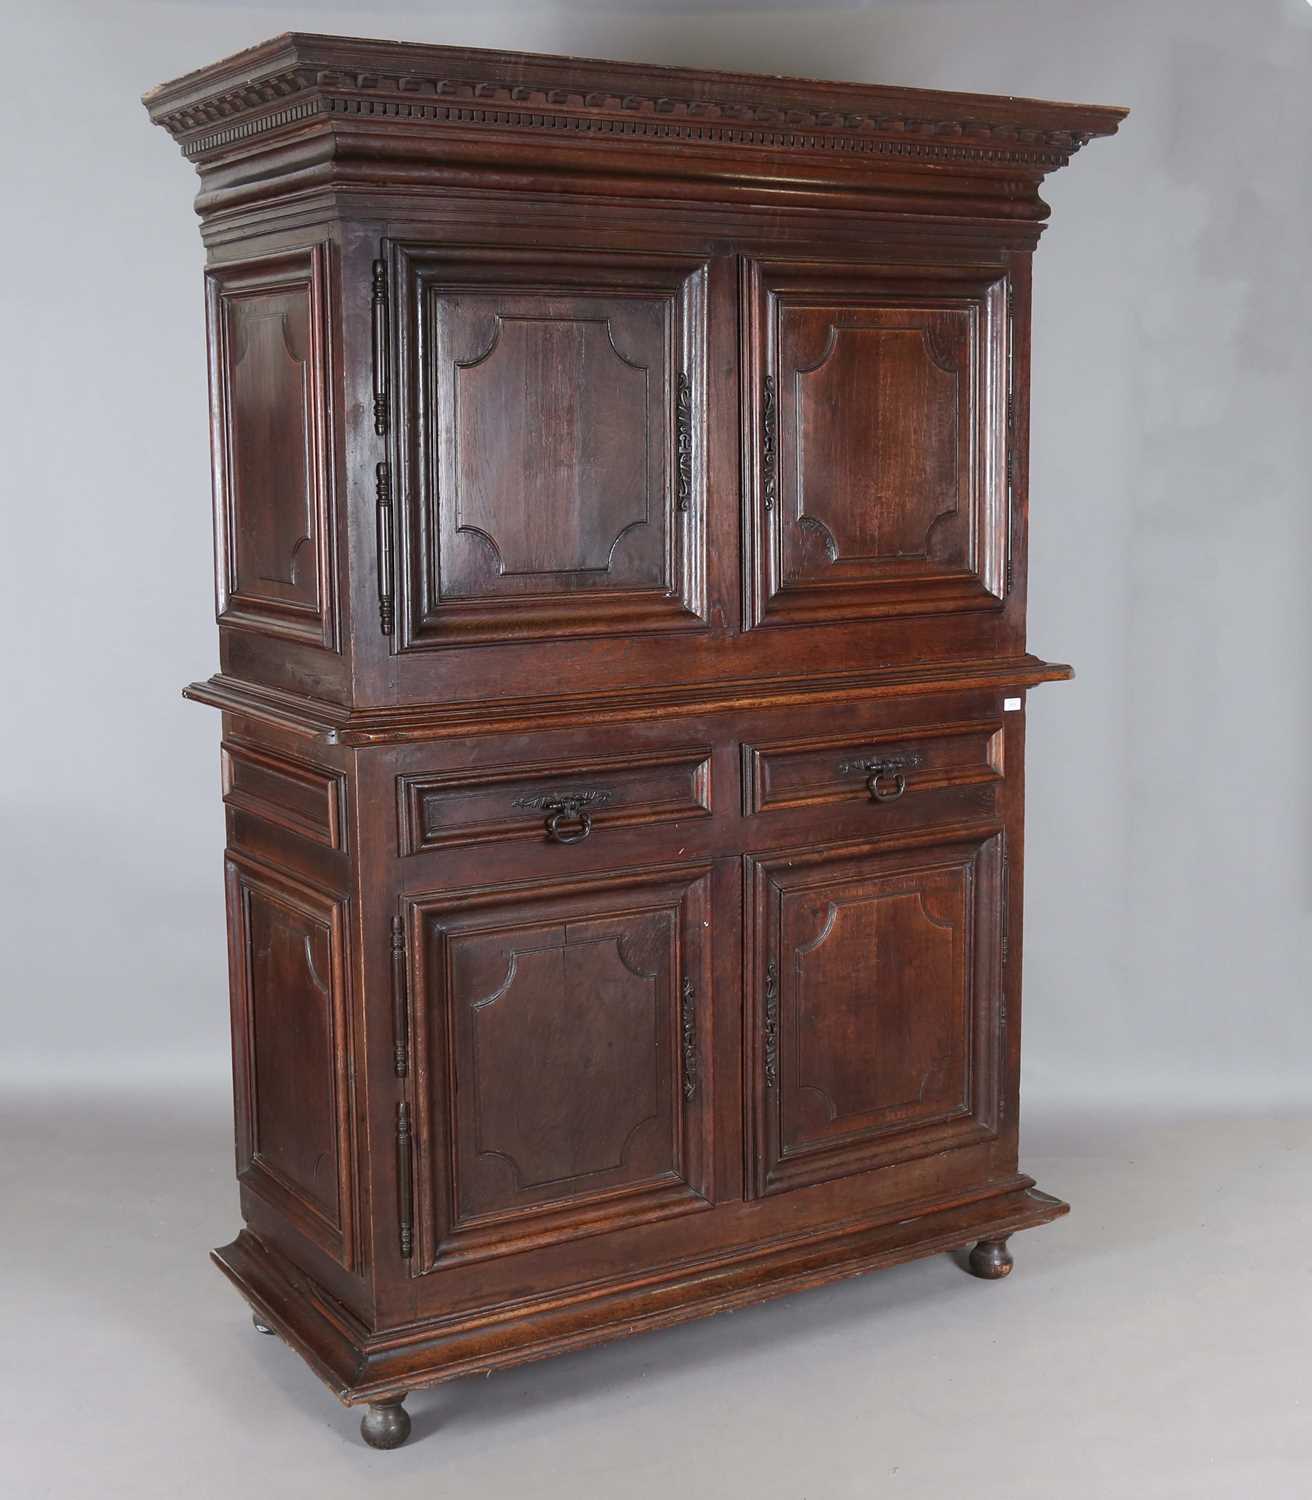 A large 18th century Continental oak cupboard, fitted with four panelled doors and two drawers,